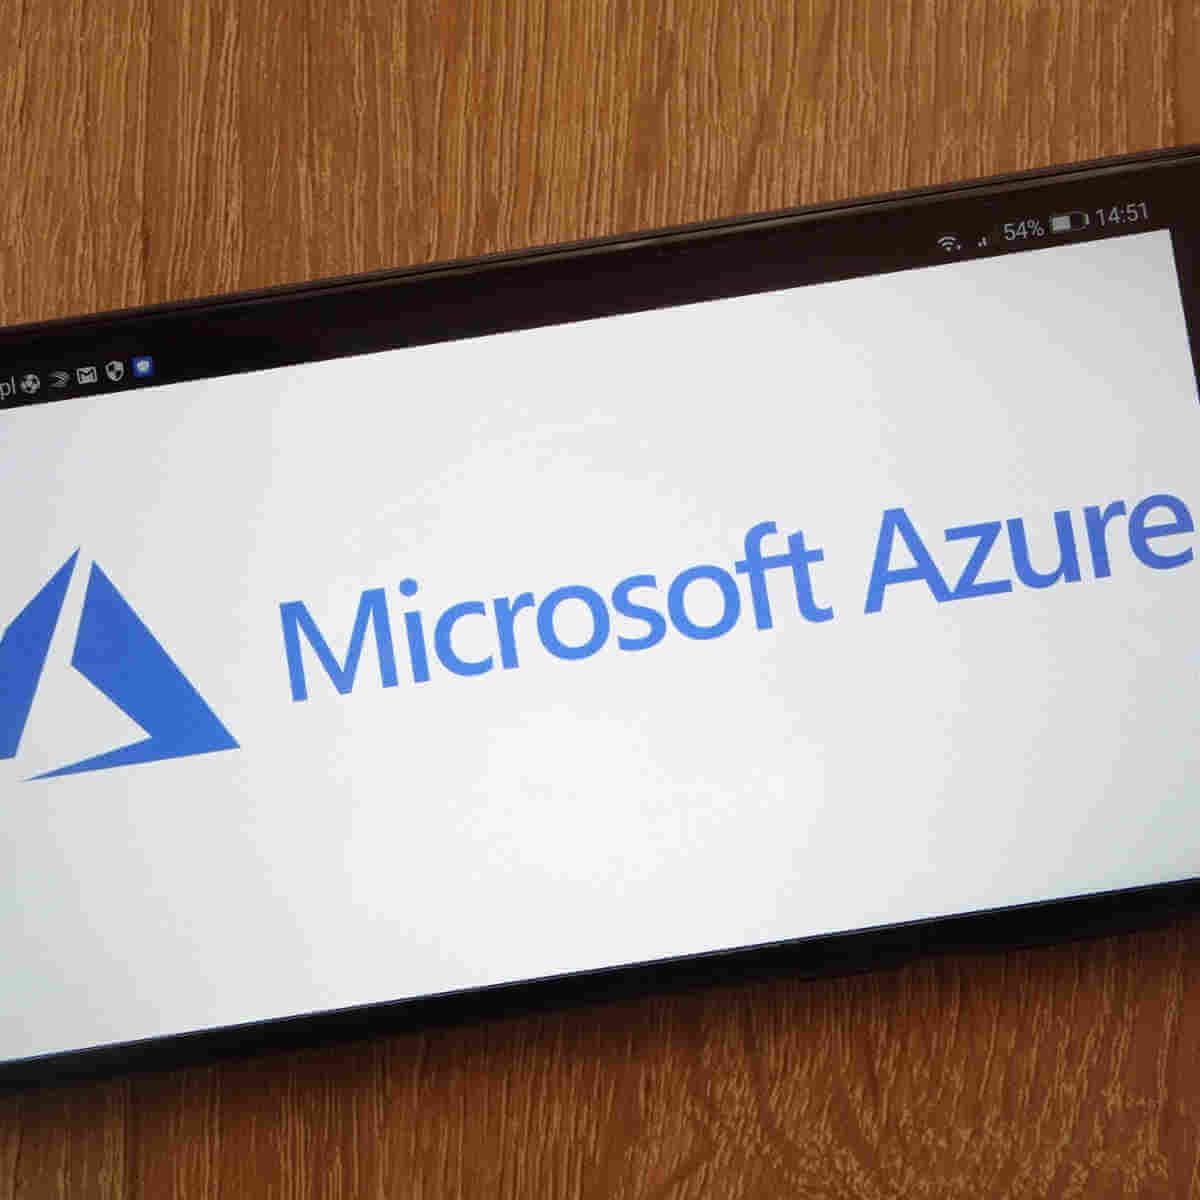 Azure to be integrated with CyberX